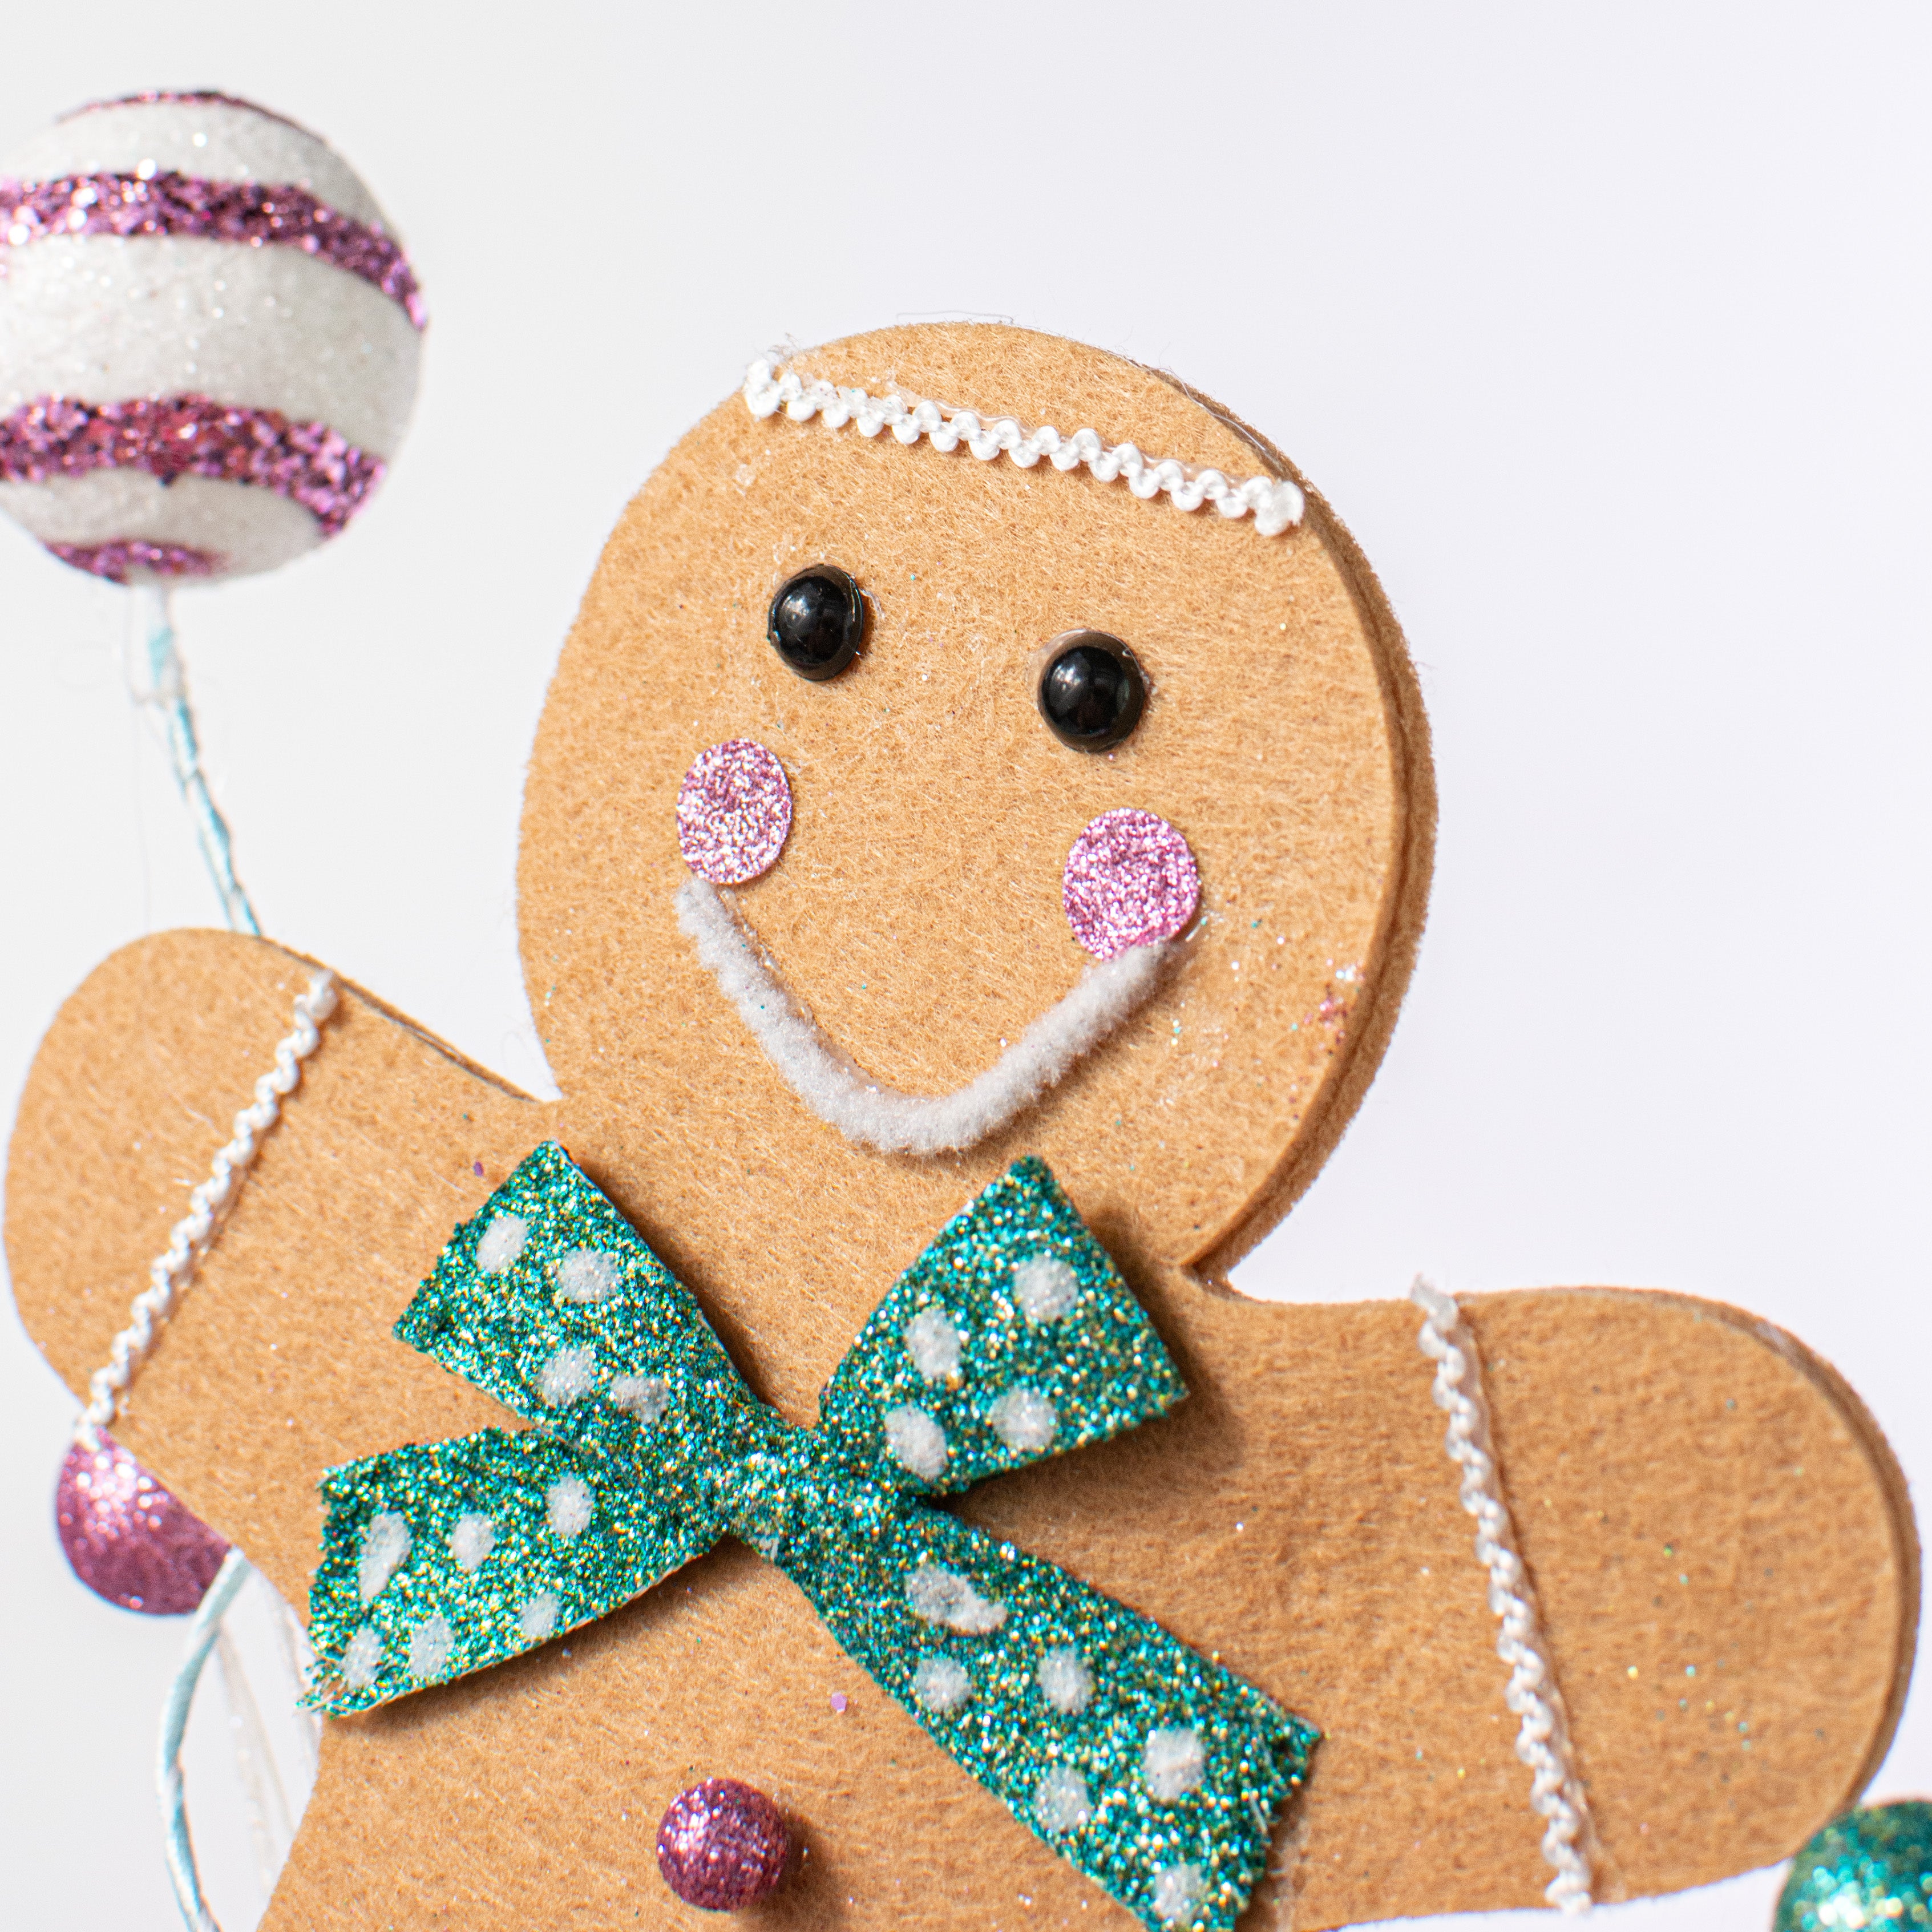 25" Gingerbread Man Candy Spray: Mint & Pink